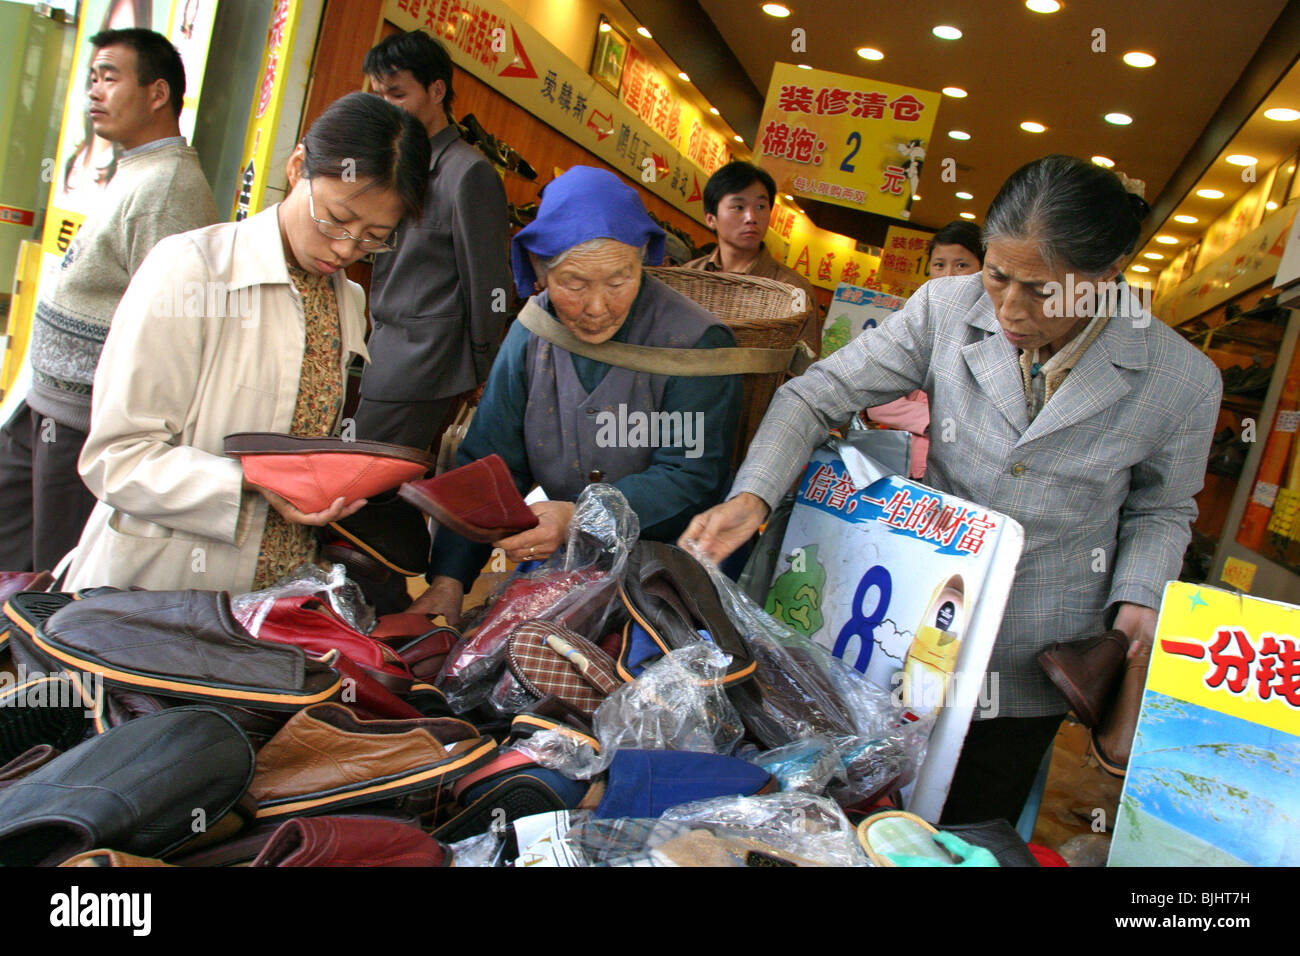 Chinese Shoppers High Resolution Stock Photography and Images - Alamy